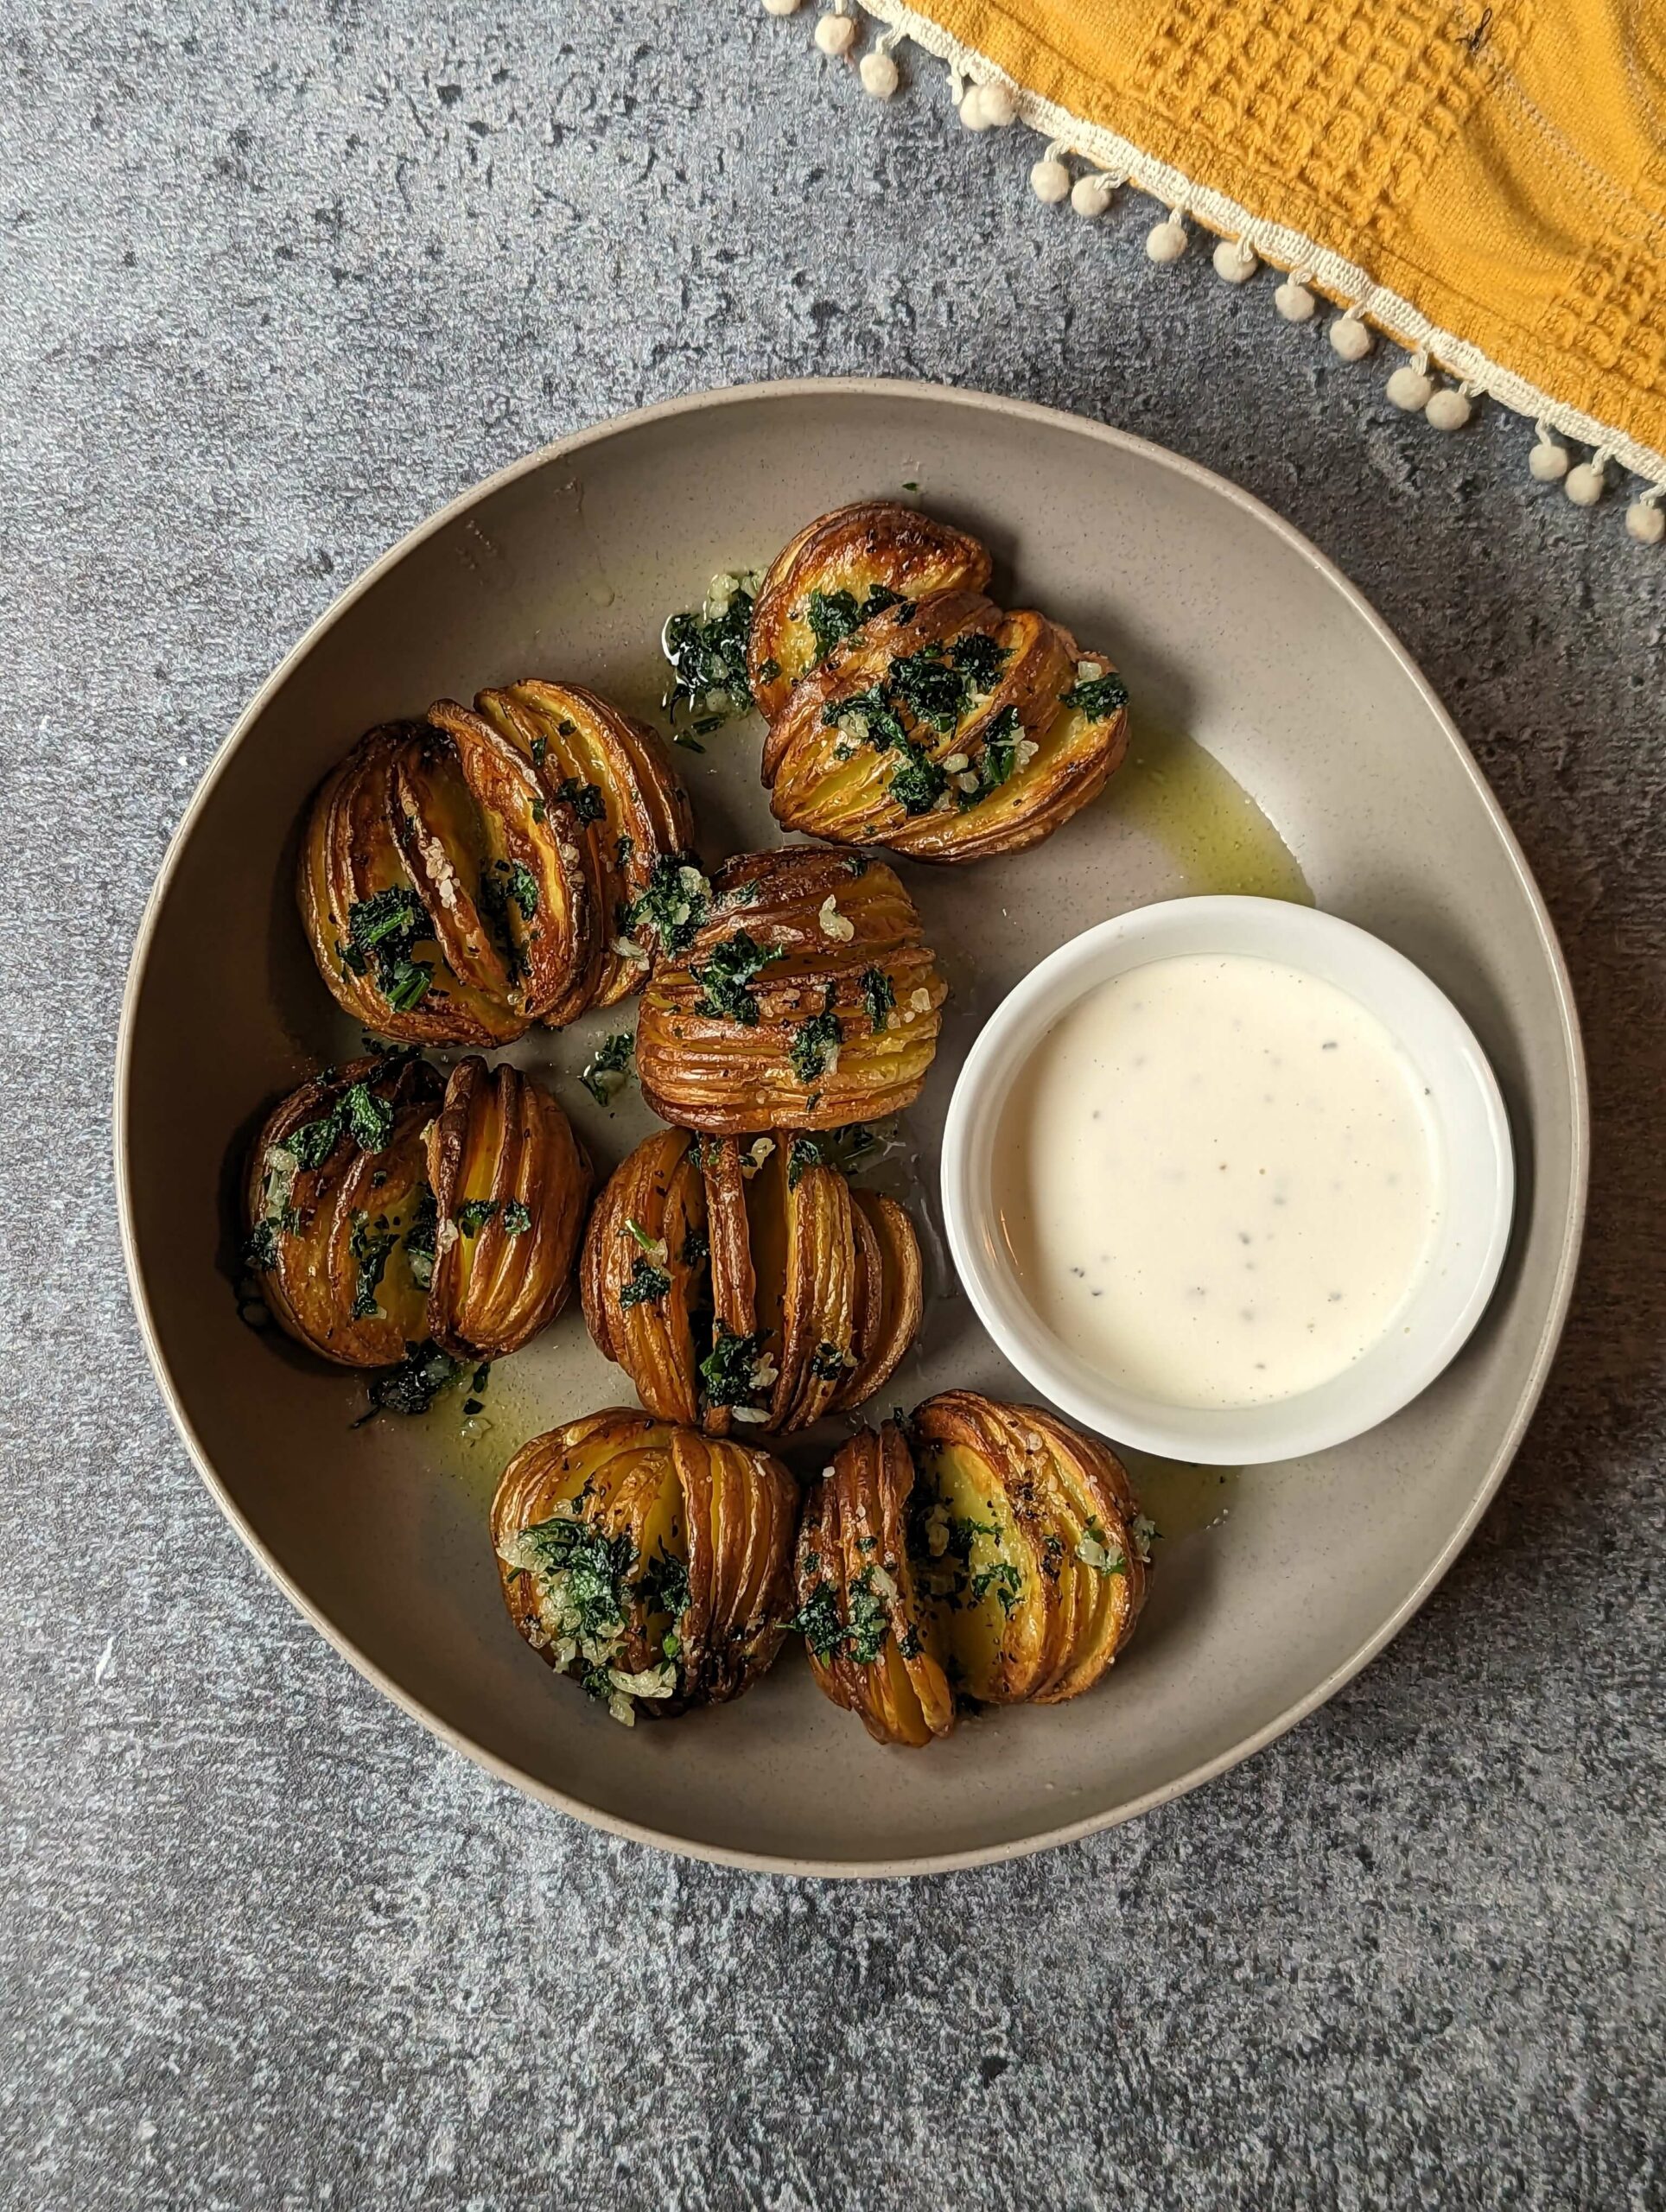 Air fryer hasselback potatoes garnished with garlic butter and served with ranch.